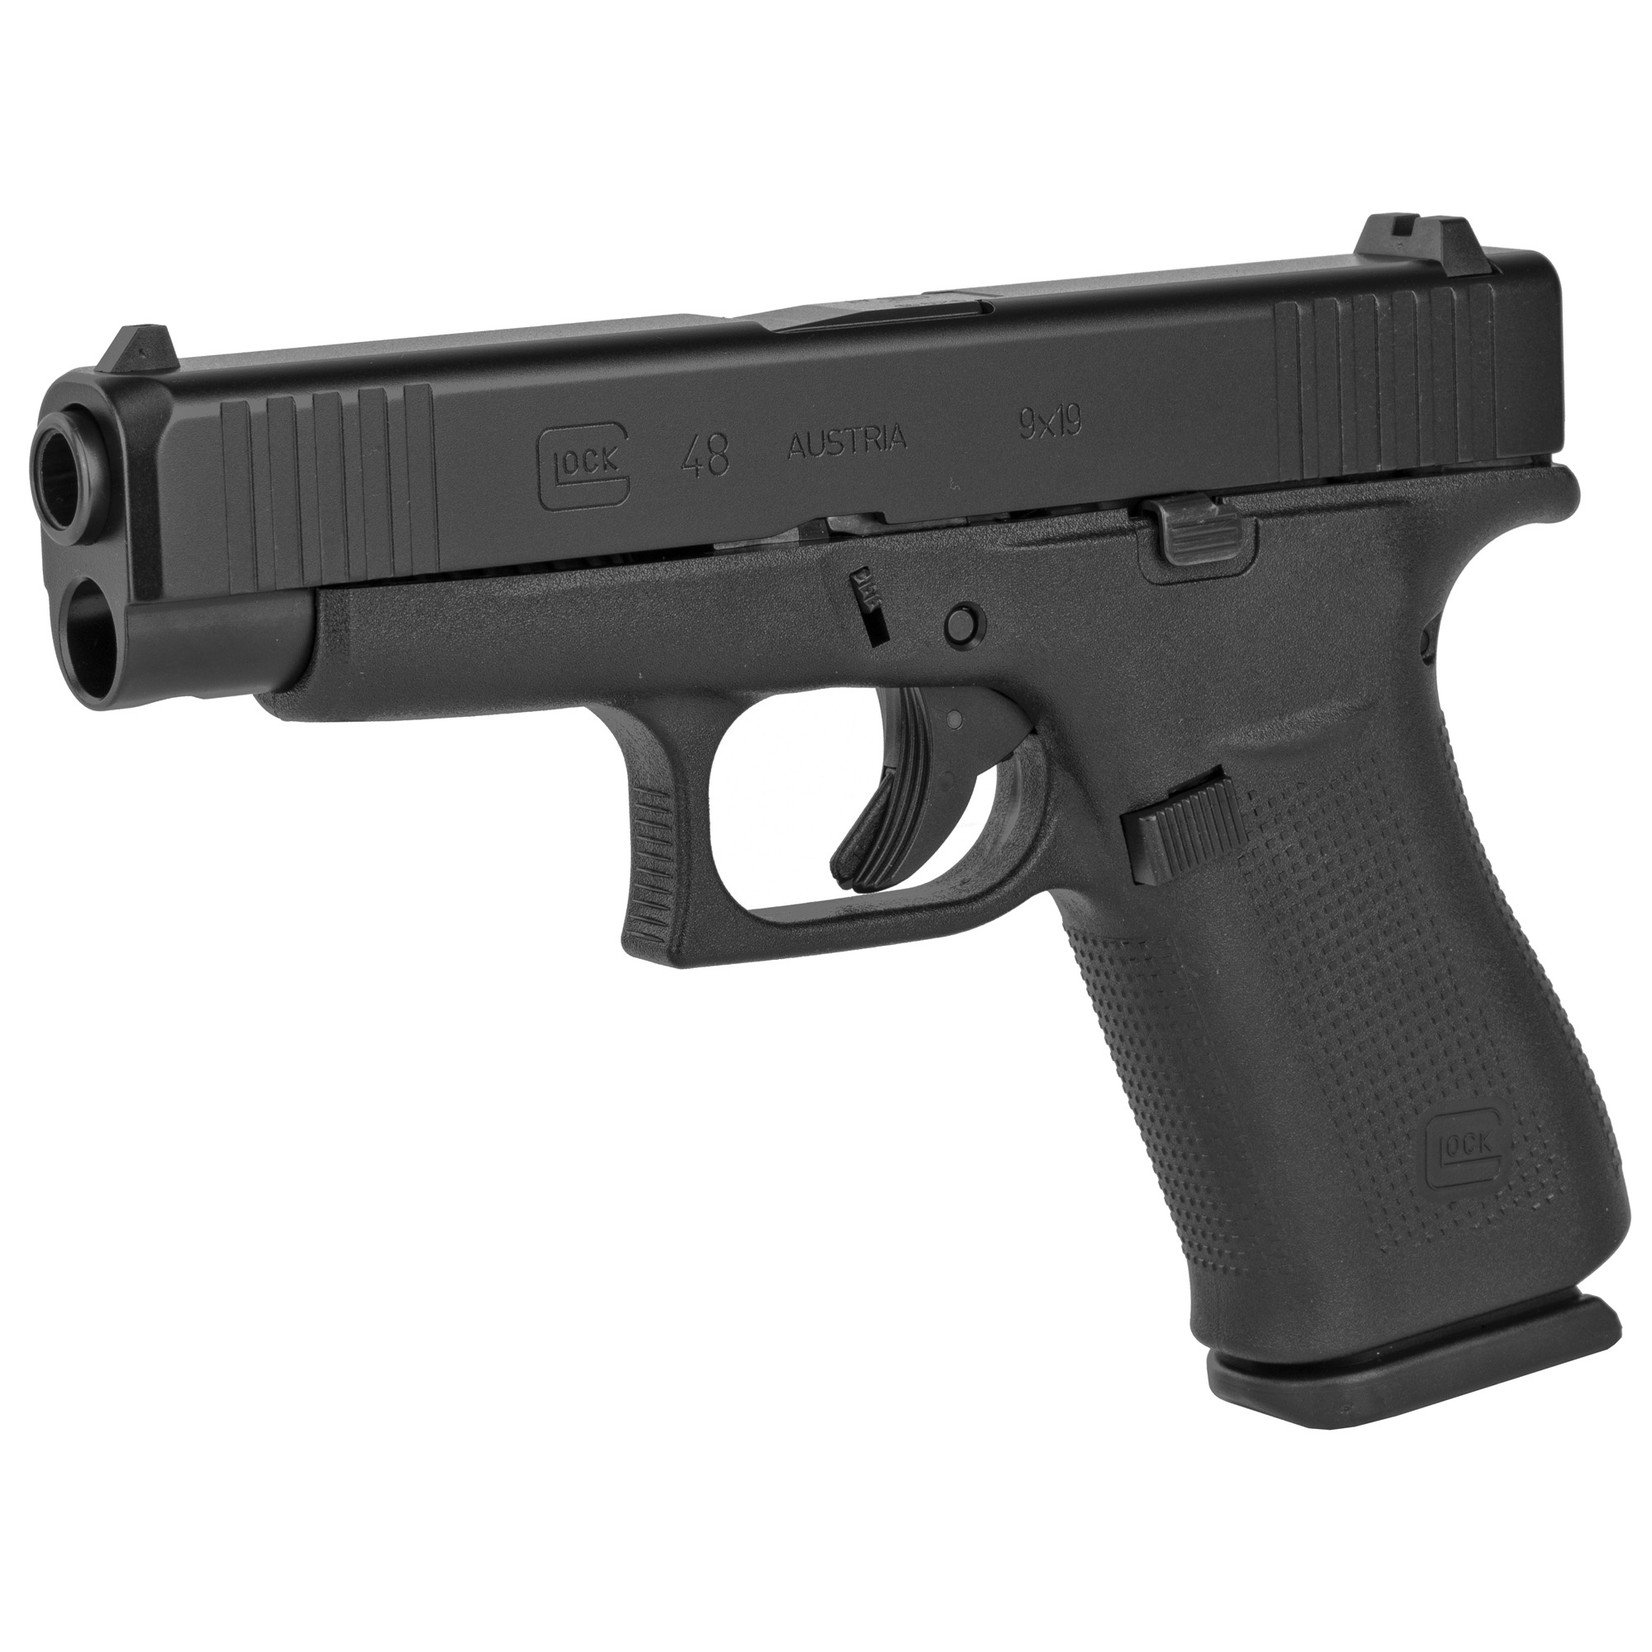 GLOCK Glock, 48, Semi-automatic, Striker Fired, Compact, 9MM, 4.17" Barrel, Polymer Frame, Black Finish, 10Rd, 2 Mags, Fixed Sights